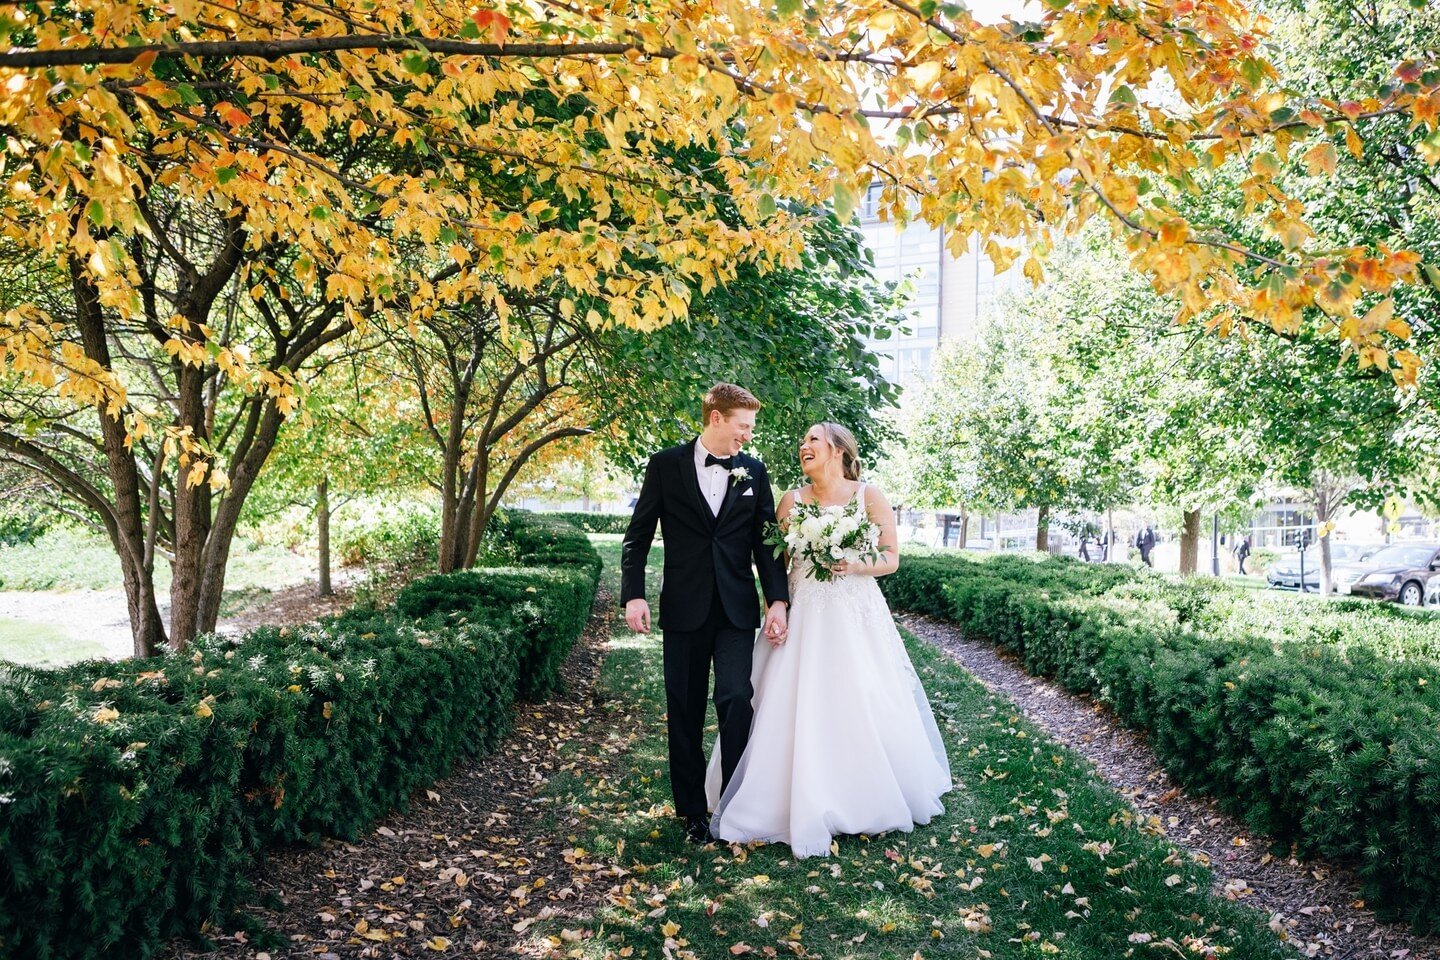 ✨Find beautiful photo-worthy moments in Turner Park, just across the street from the Empire Room ✨⁠
⁠
Discover the possibilities of your event at our venue when you schedule a tour with one of our Expert Event Managers today.✨⁠
⁠
Photography | @andre